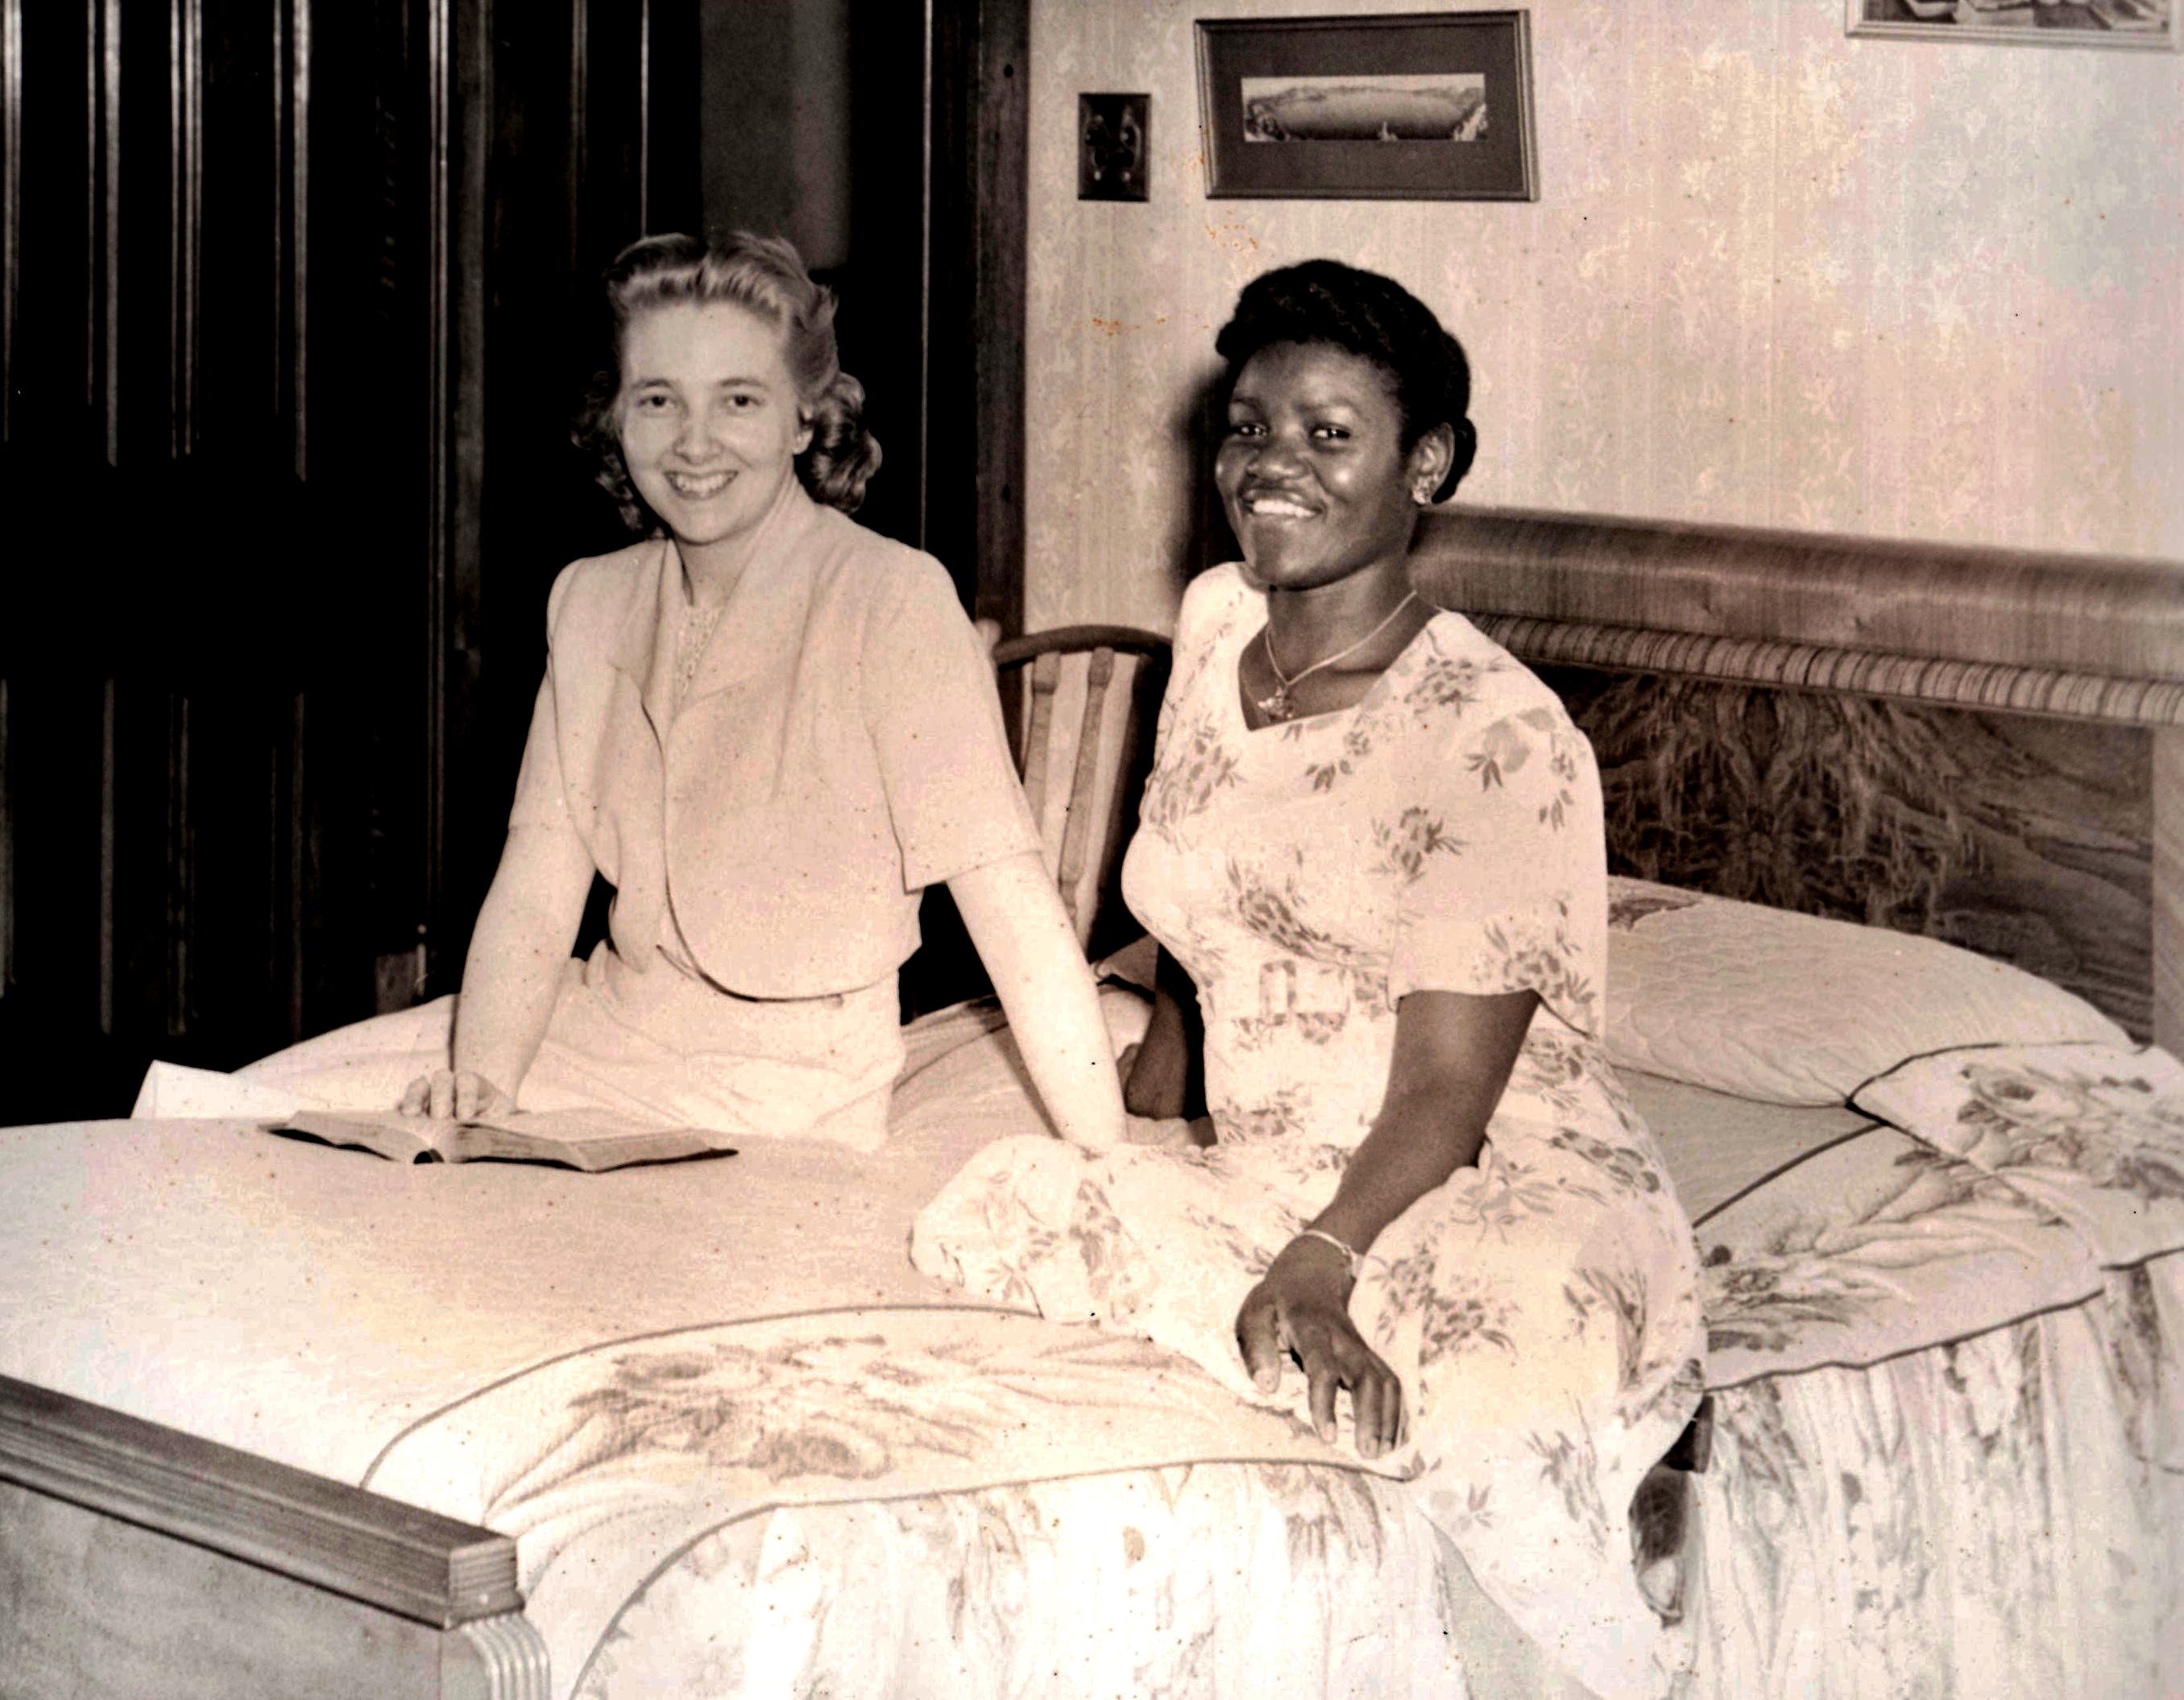 MOTHER DIVINE with Miss Peaceful Love, her companion -maid, taken at the Divine Lorraine Hotel durring the anniversarry of Her Marriage to FATHER DIVINE. The dress of followers is modest at all times and baring of shoulders is taboo.